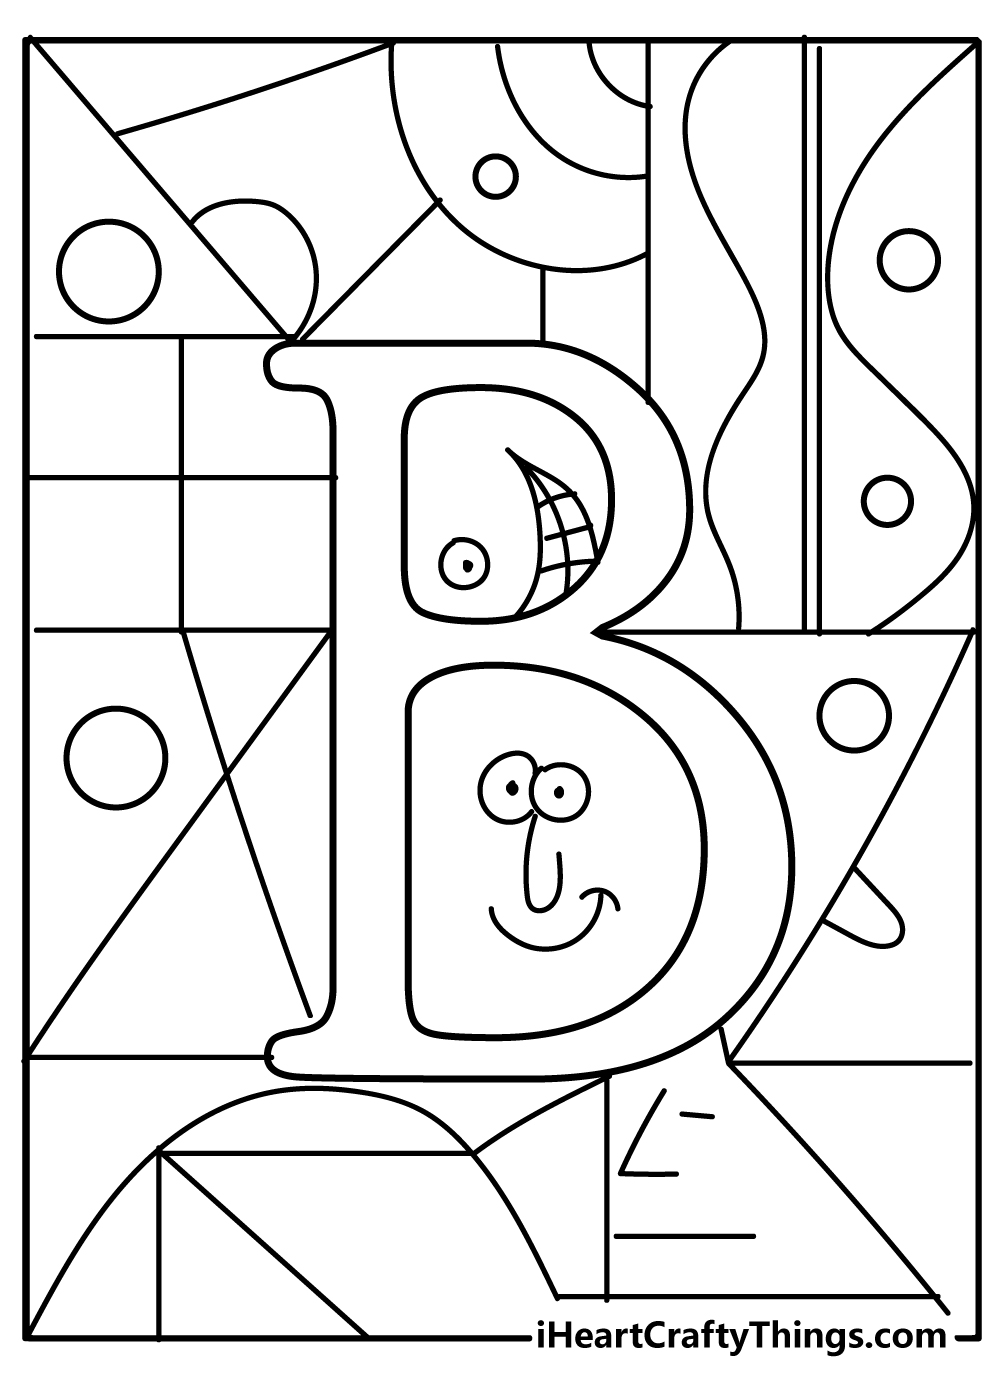 Letter B Coloring Pages free pdf download